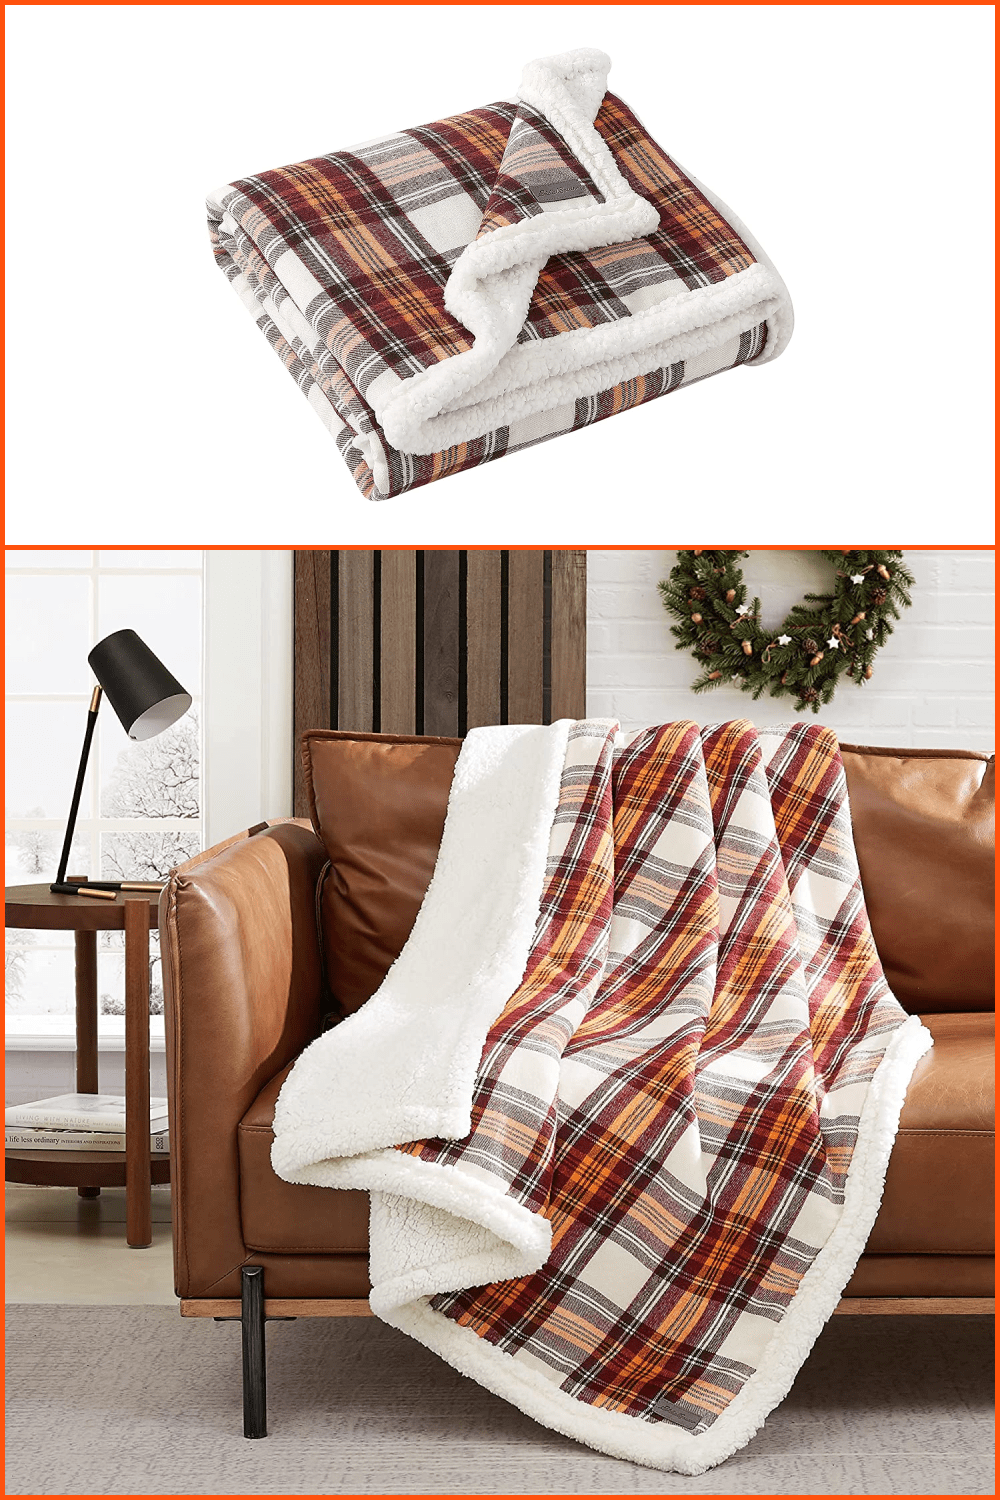 Blanket with a beautiful striped pattern on the sofa.